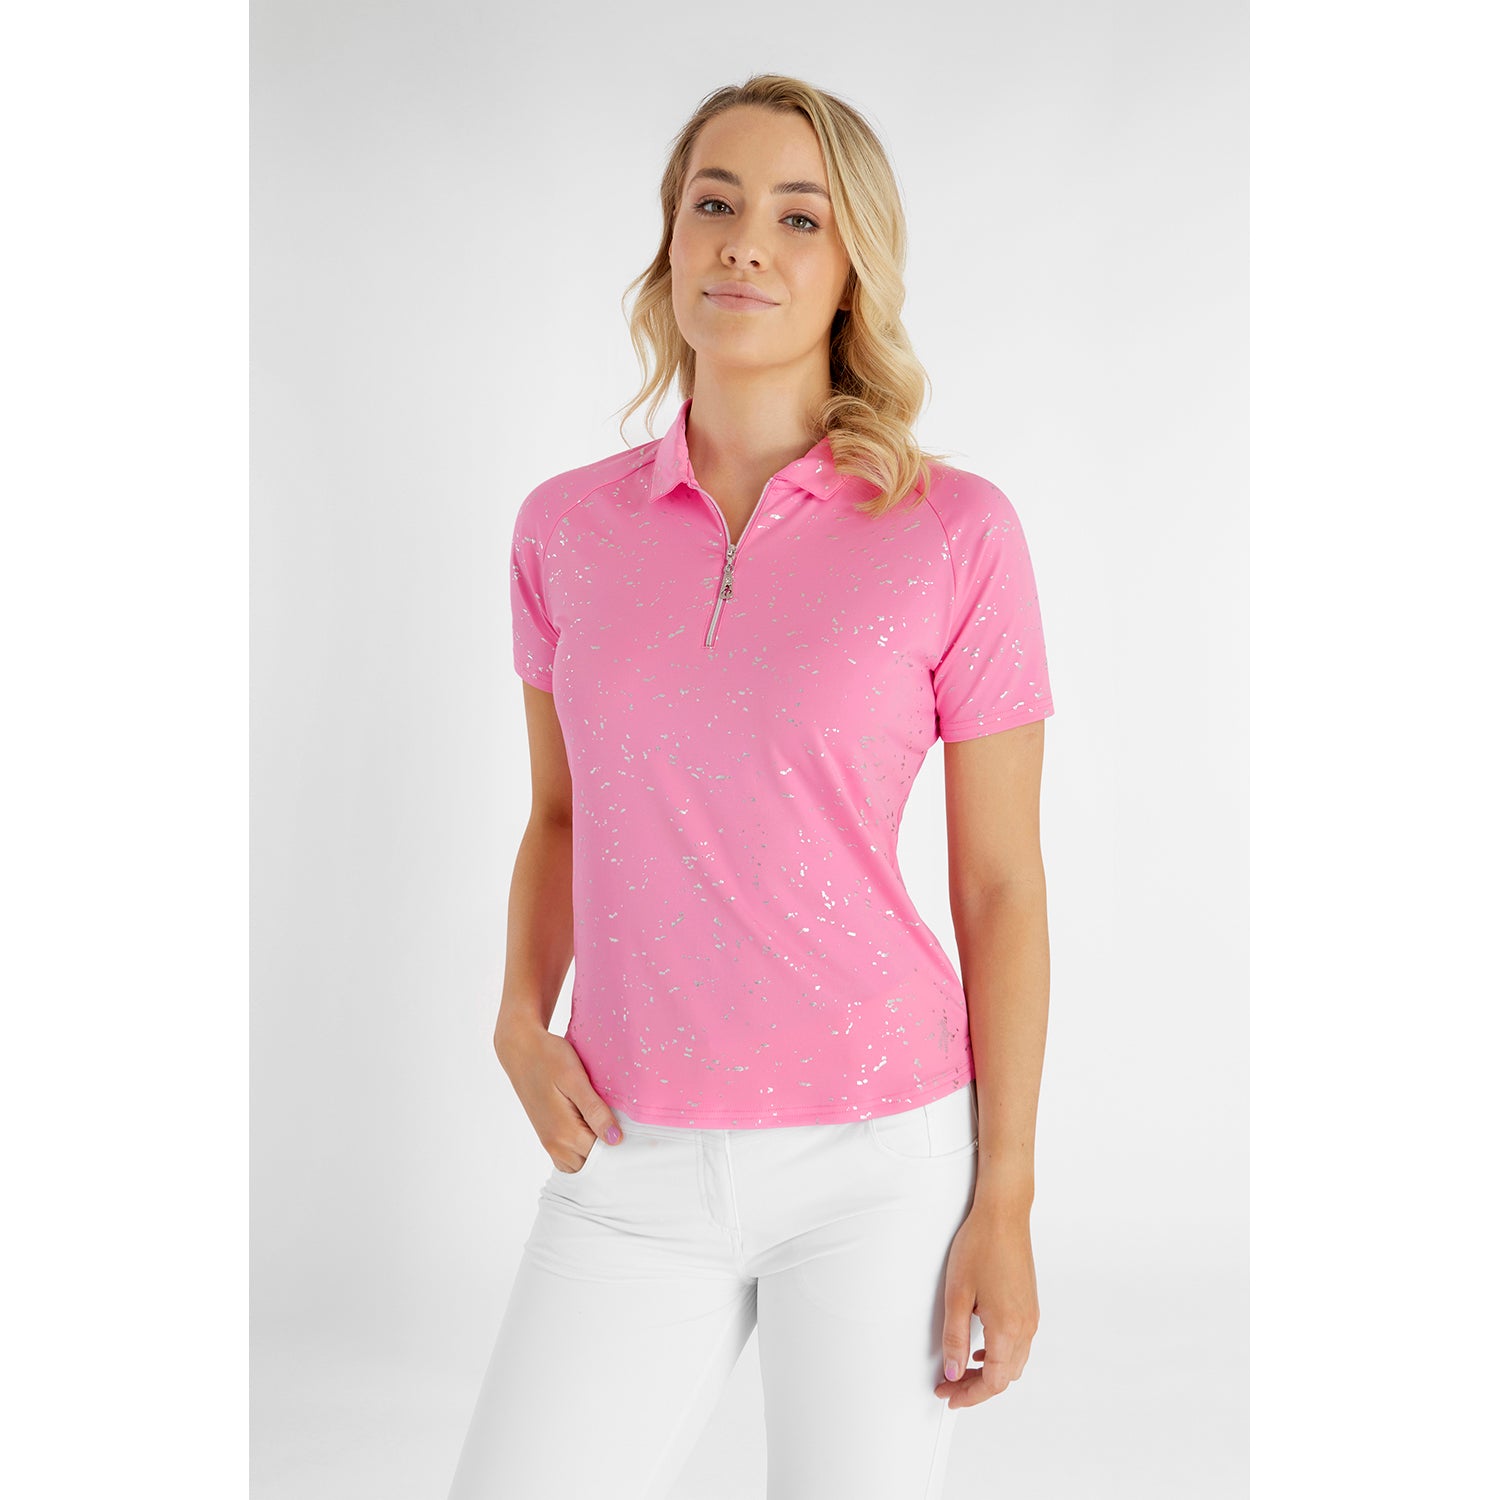 Green Lamb Ladies Zip-Neck Short Sleeve Polo Shirt with Silver Foil Print in Candy